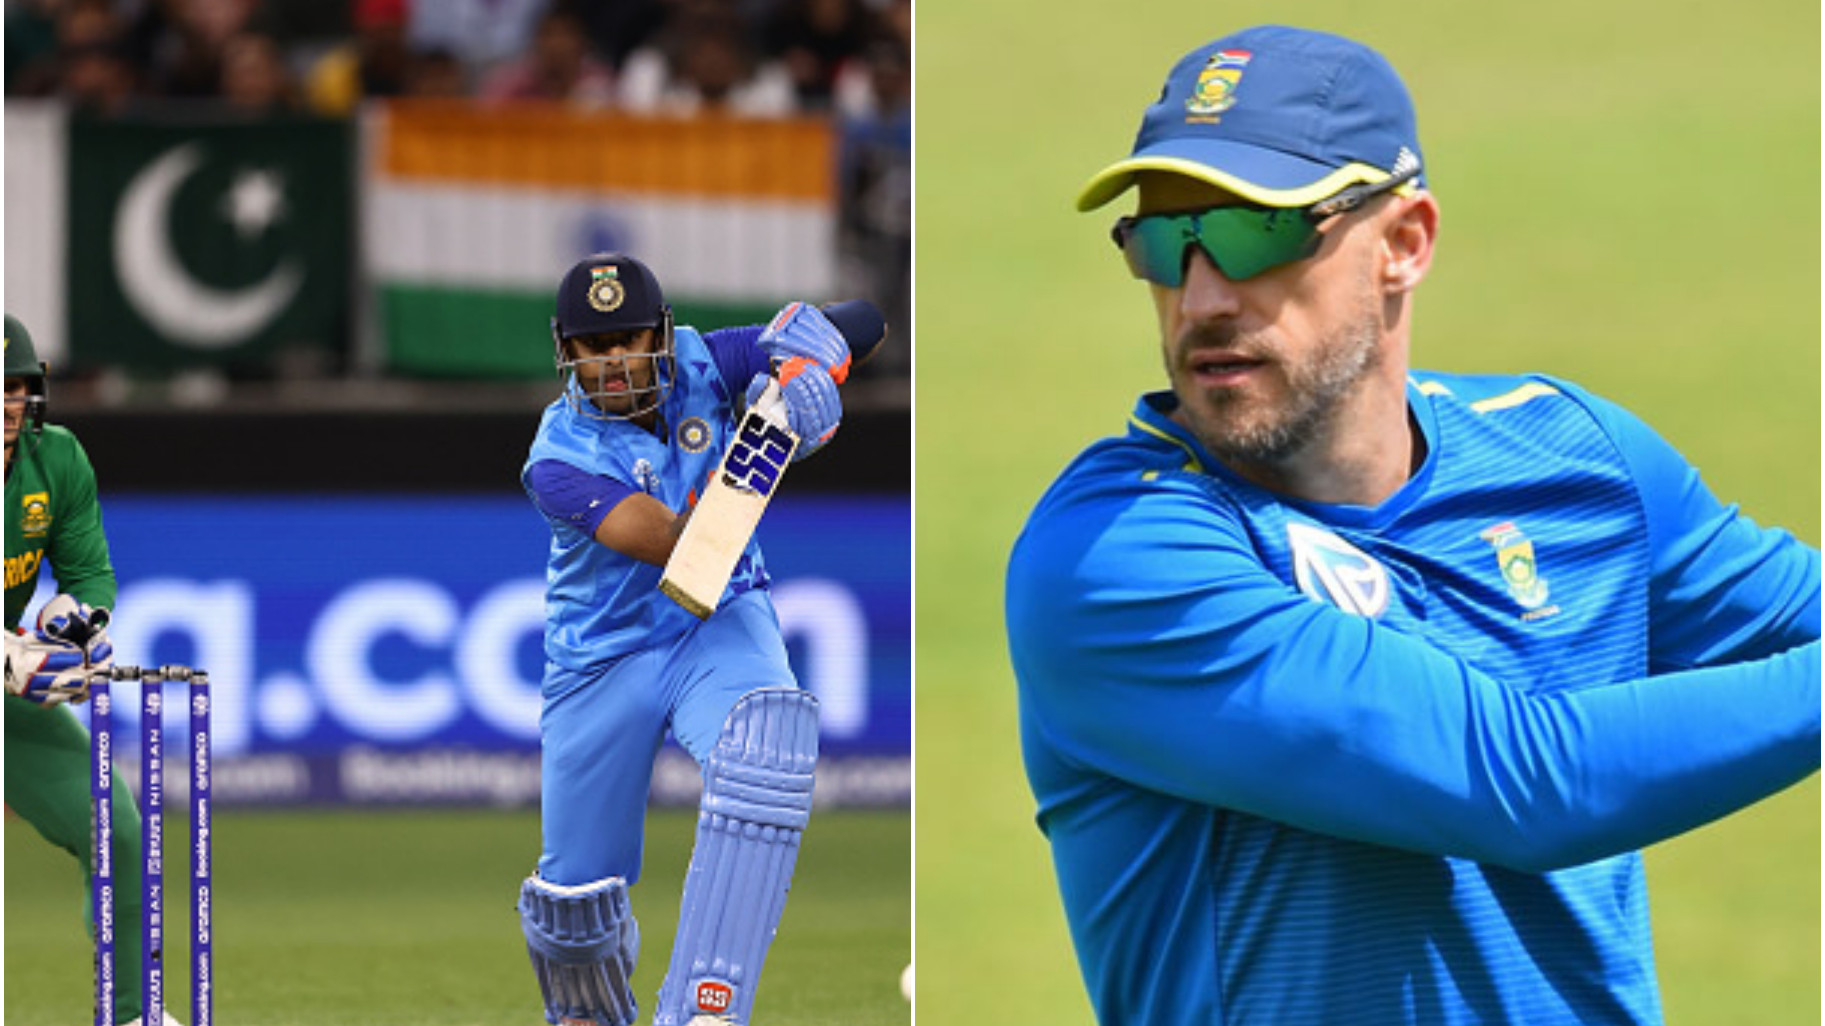 T20 World Cup 2022: “He's just a fantastic T20 player to watch” - Faf du Plessis on Suryakumar’s Perth masterclass against SA